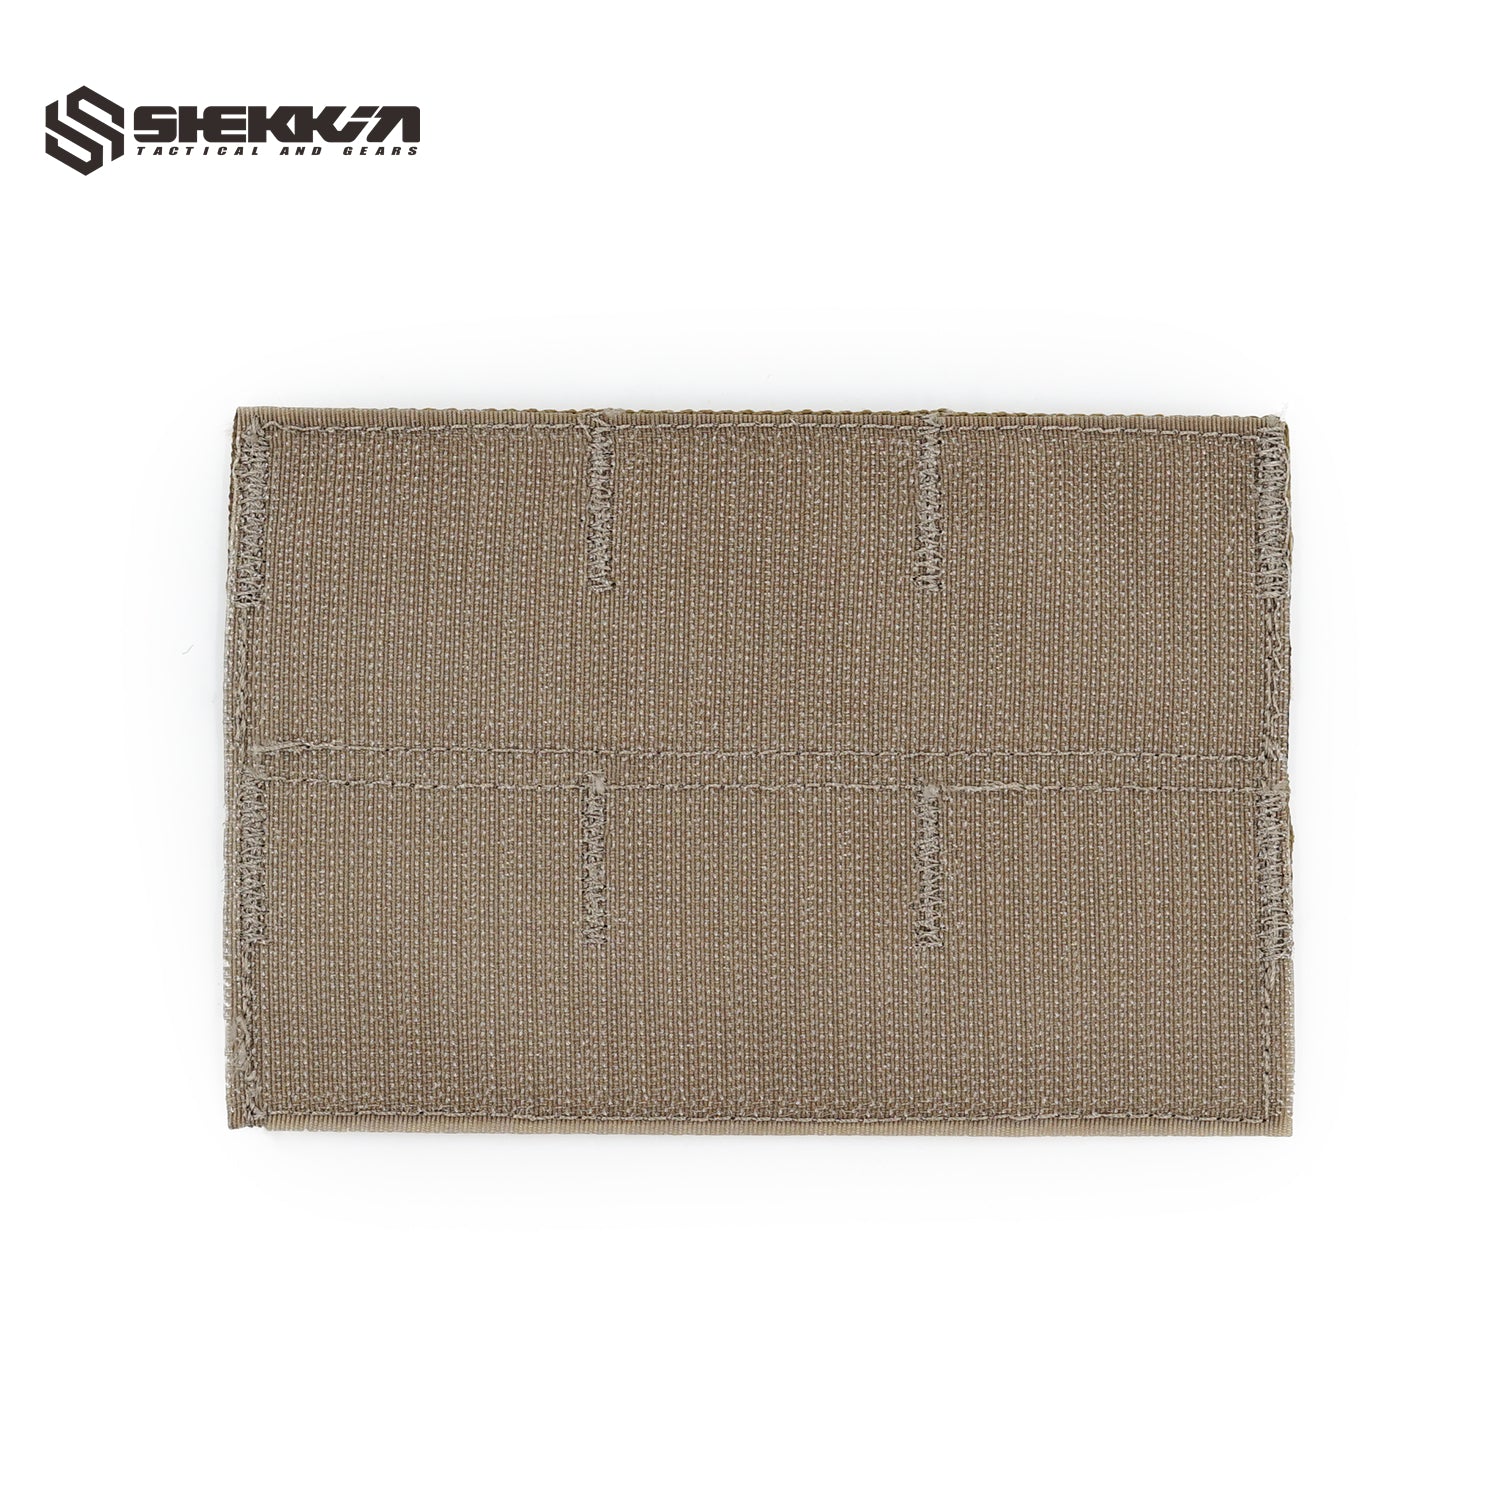 Delta force CAG velcro molle adapt panel for tri banger (budget version) - Shekkin Gears